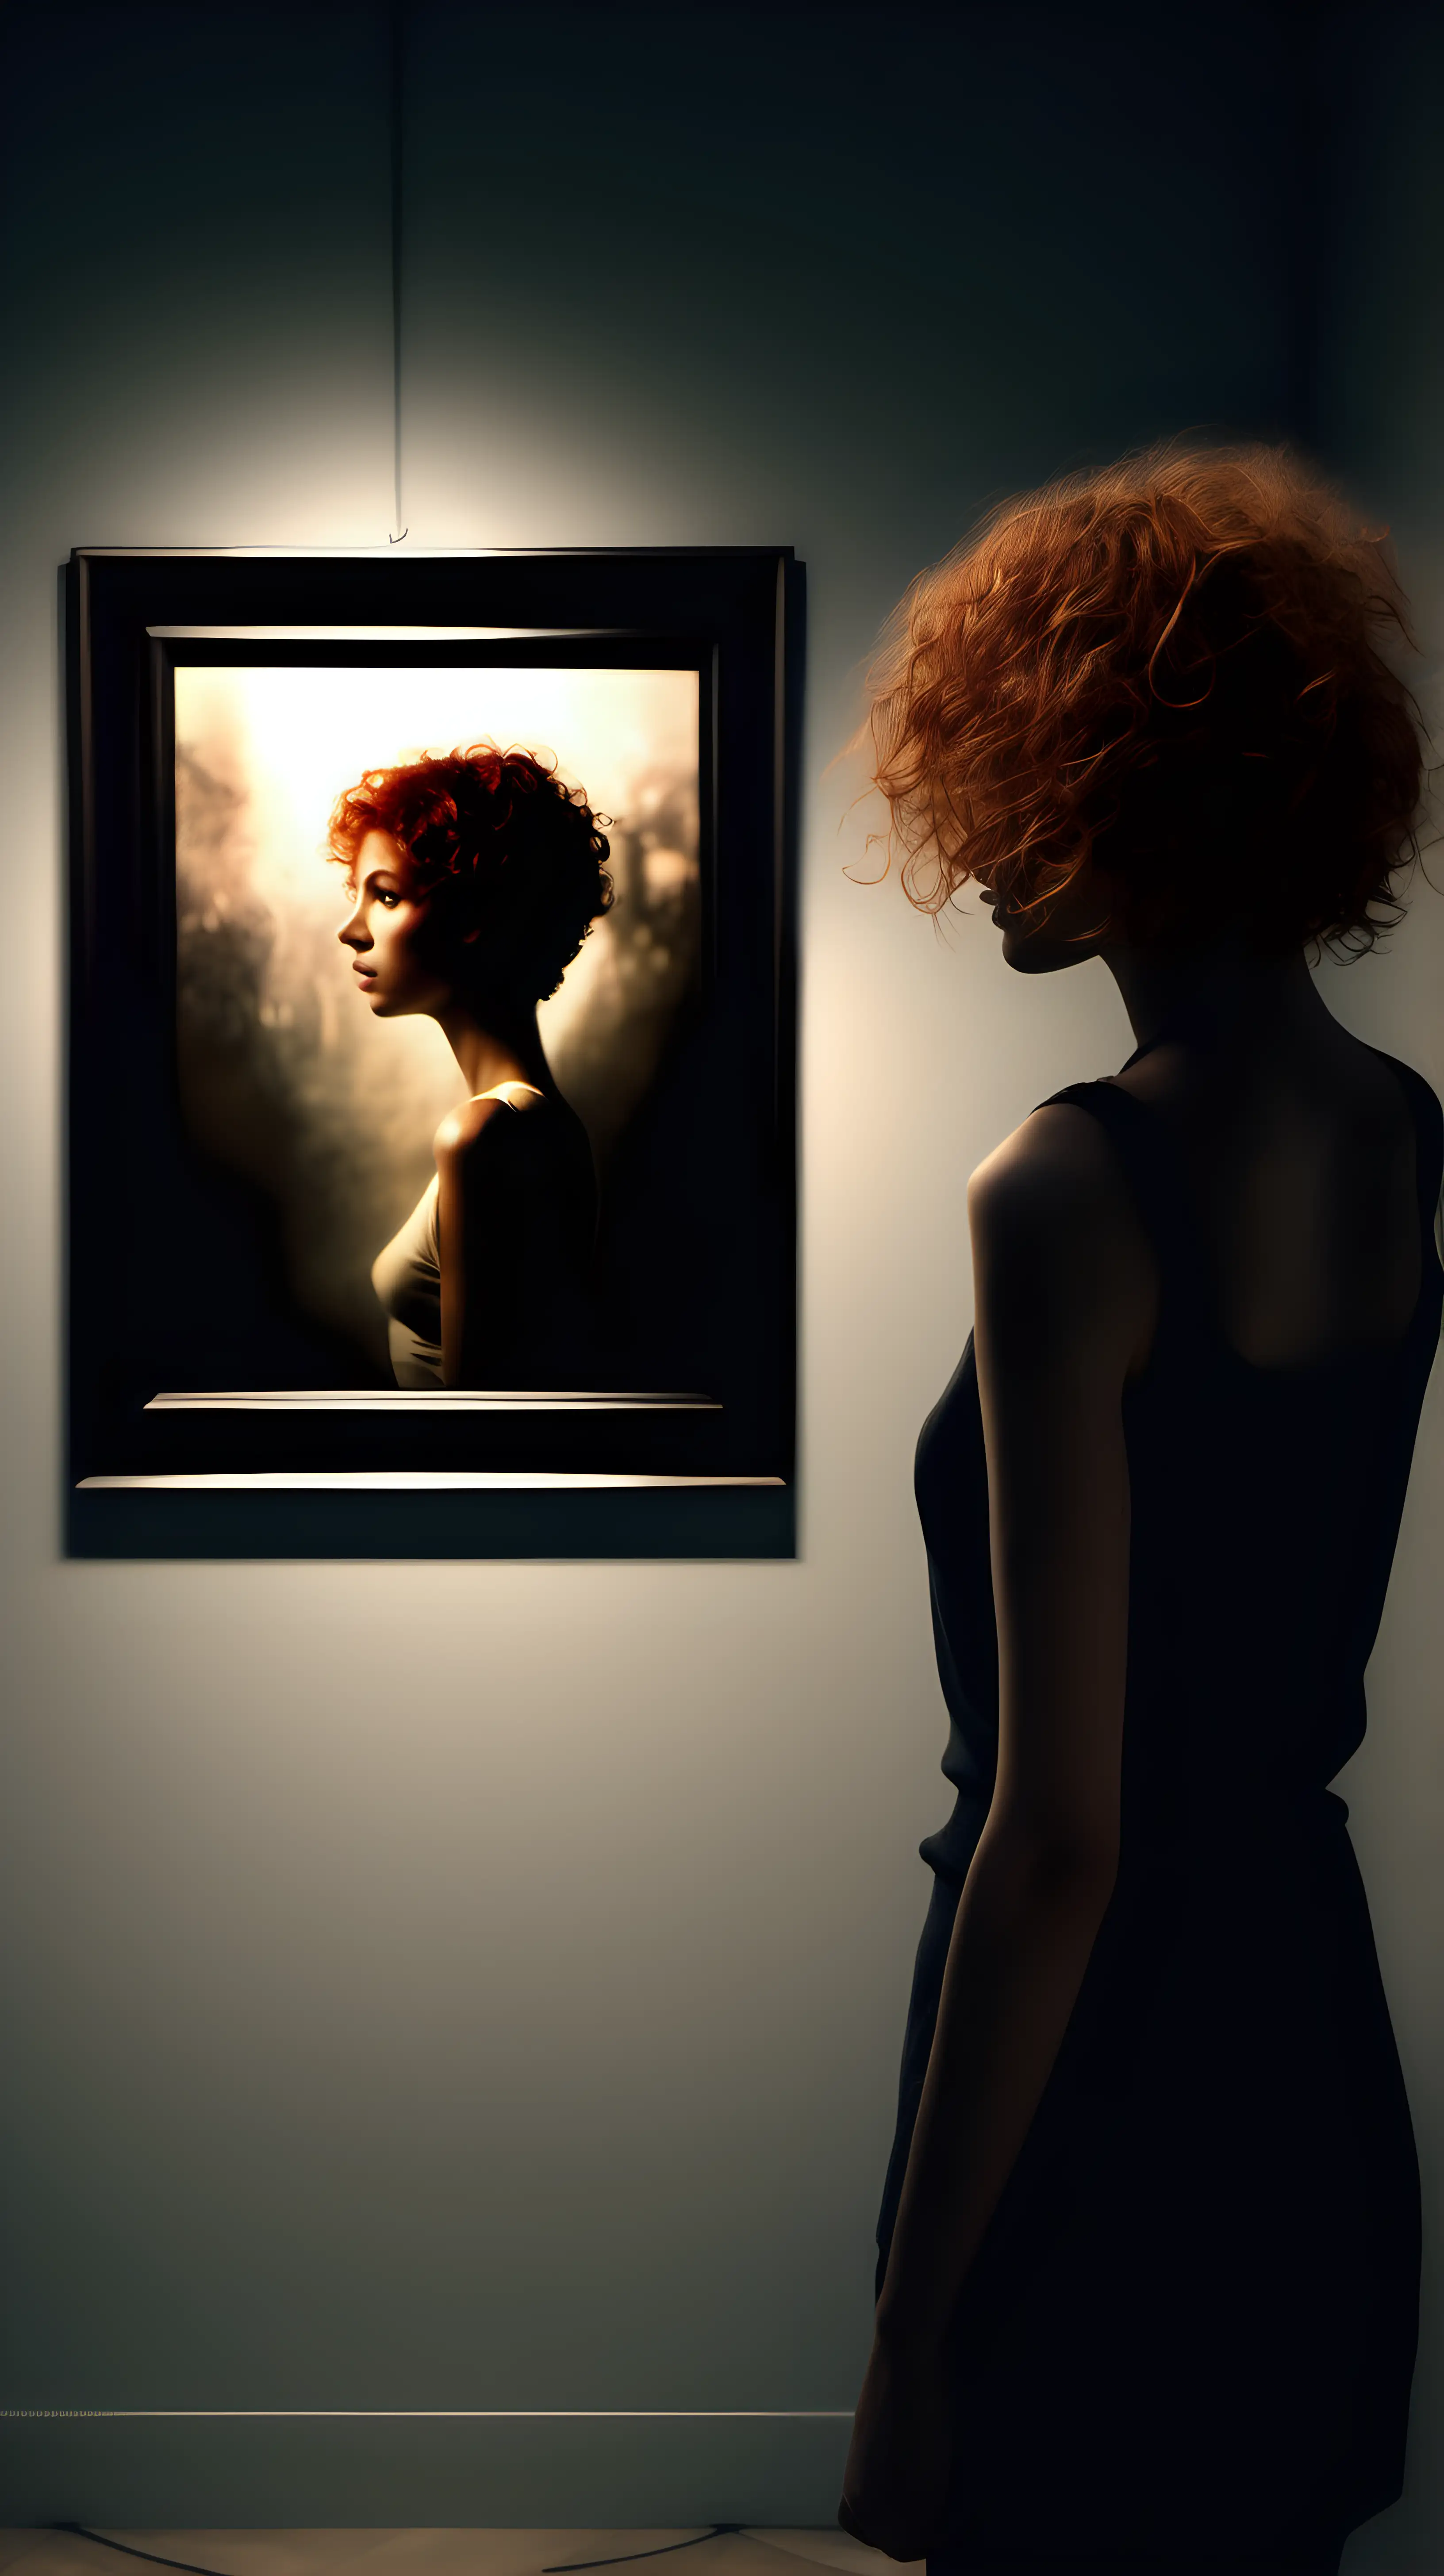 photorealistic scene of a young ginger short curly hair, watching breathtaken at some artwork framed in haning on a wall, in dark dreamy like atmosphere, only seeing the back of the sexy girl